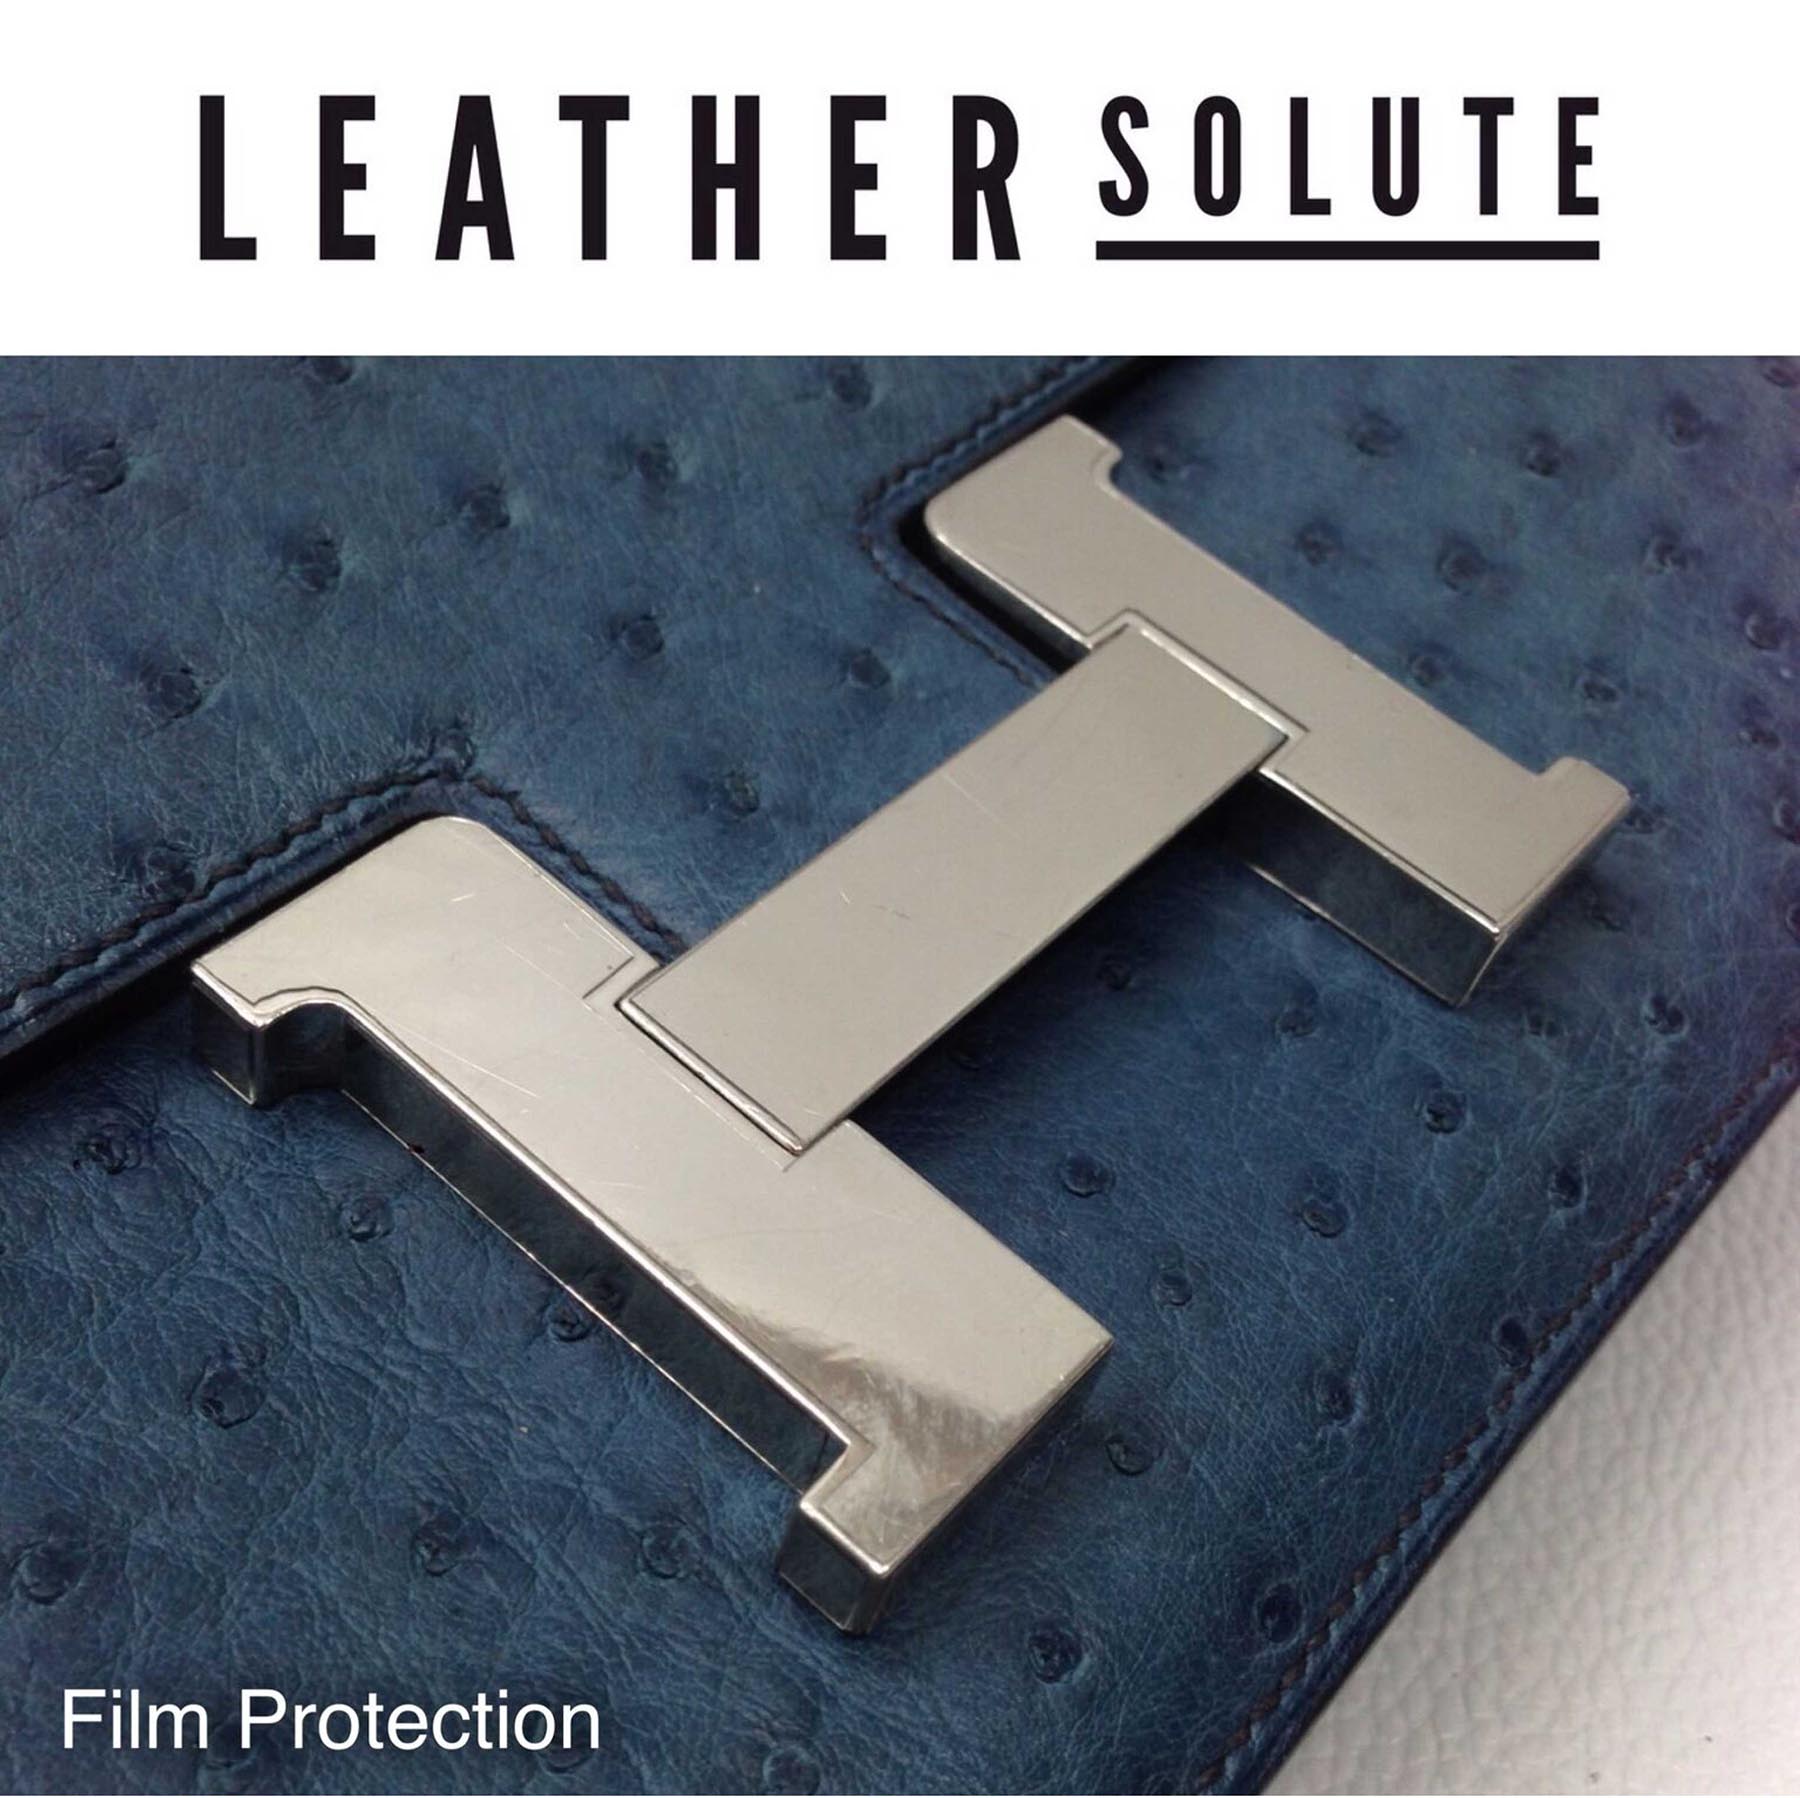 //leathersolute.co.th/wp-content/uploads/2018/11/film-protection-2.jpg